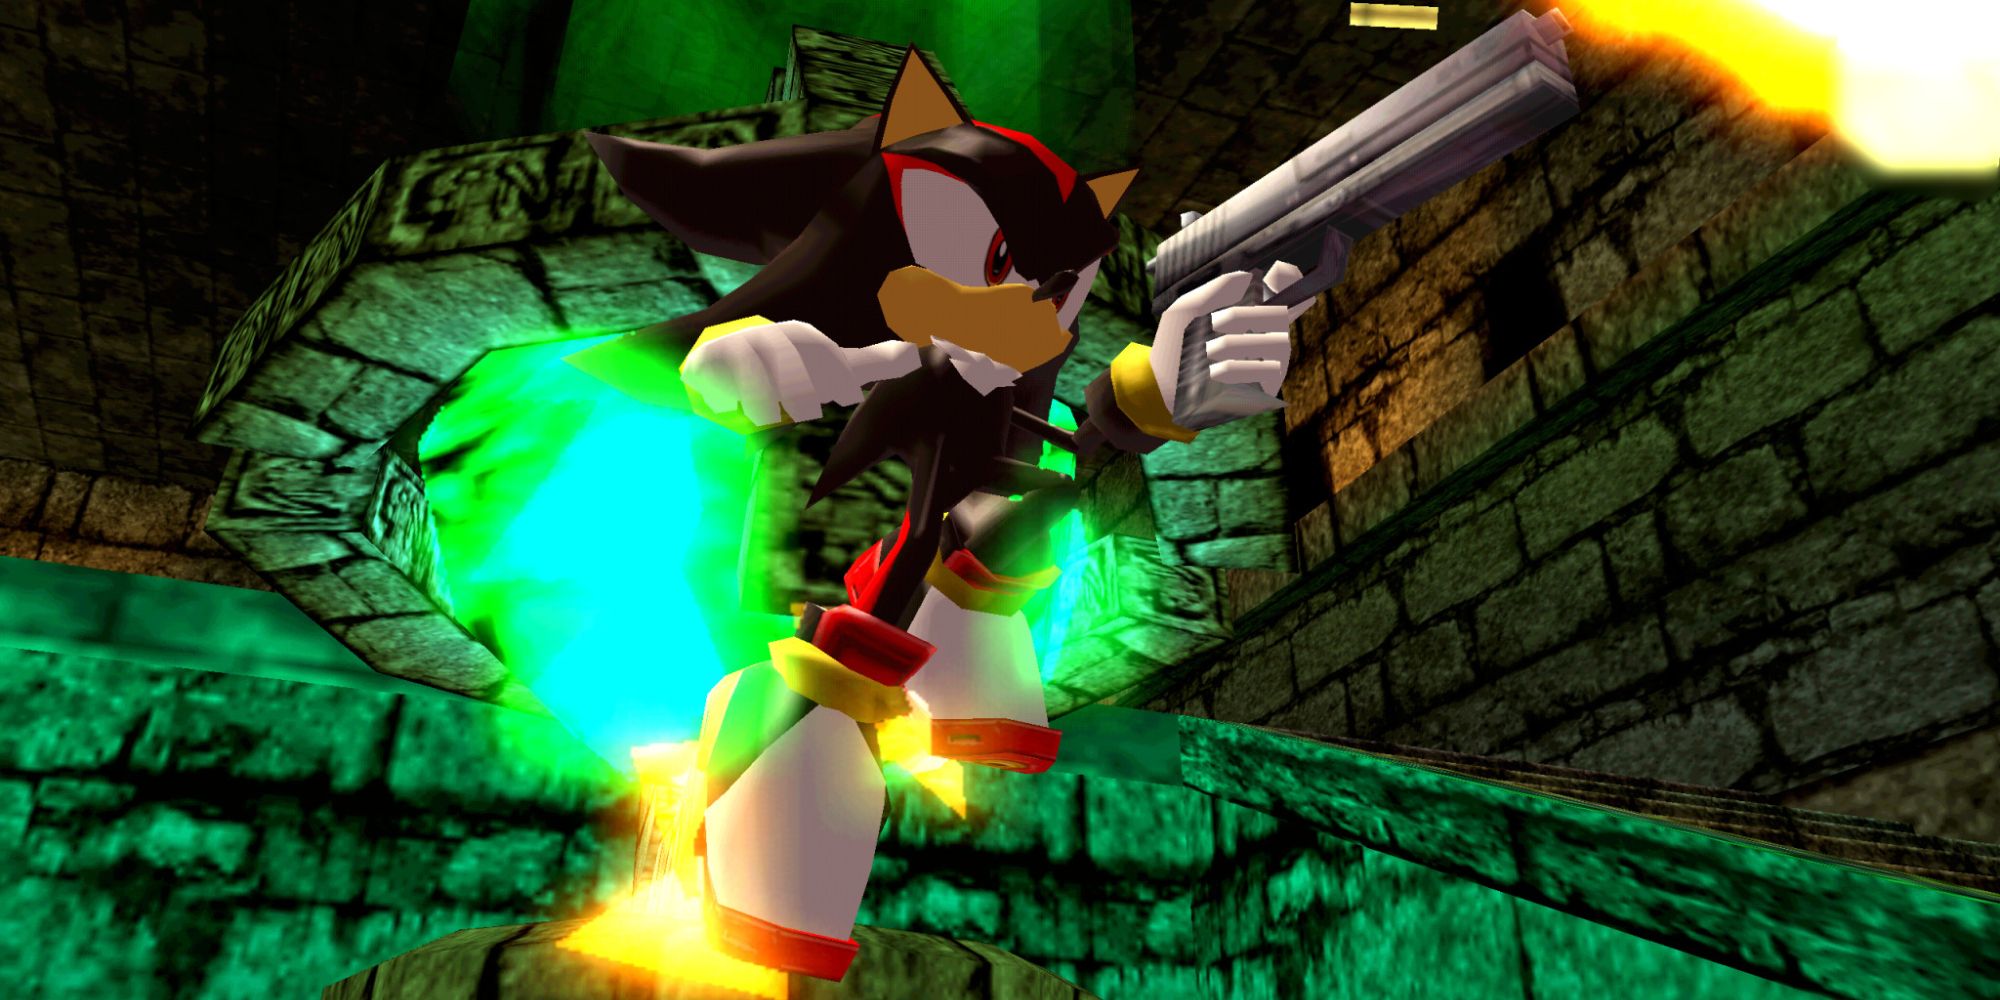 SEGA on X: Get Shadow FREE this weekend in Sonic Dash @AppStore